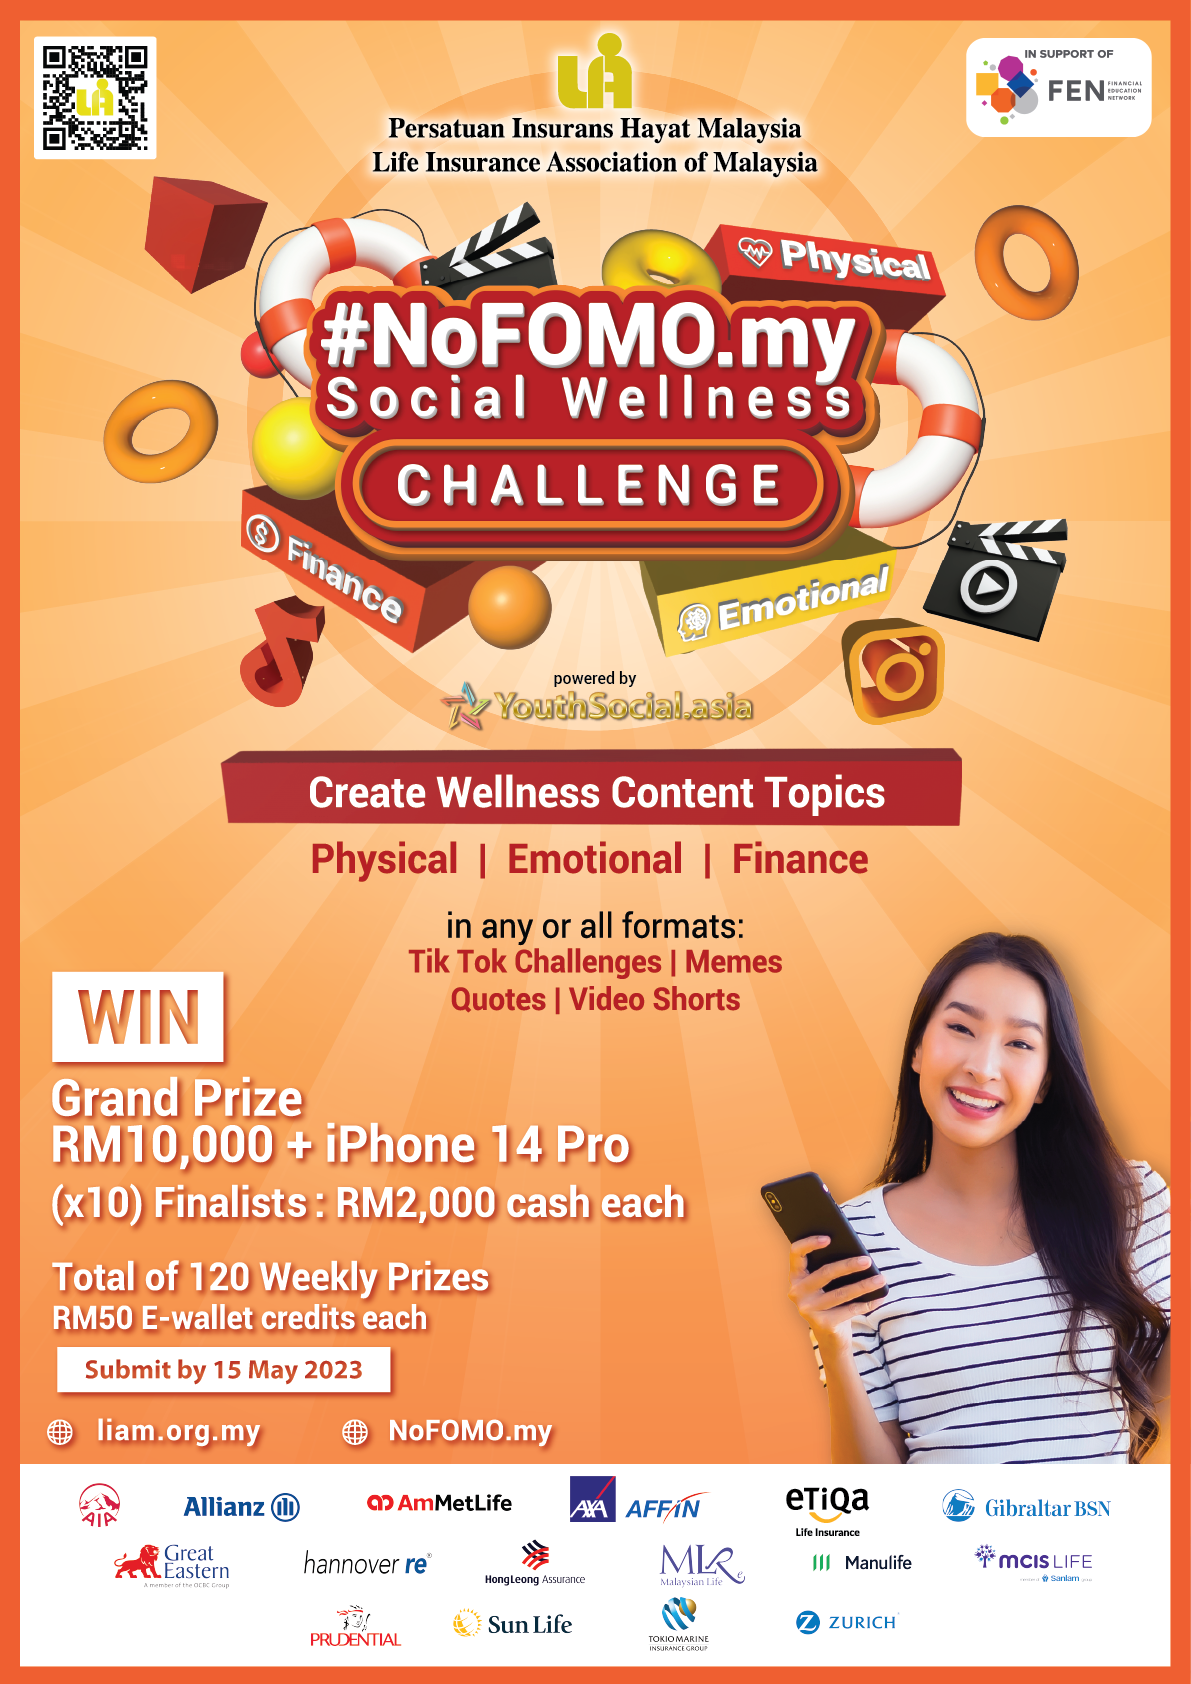 Interested to win up to RM 42,999 in Cash and Prizes? Say no more!